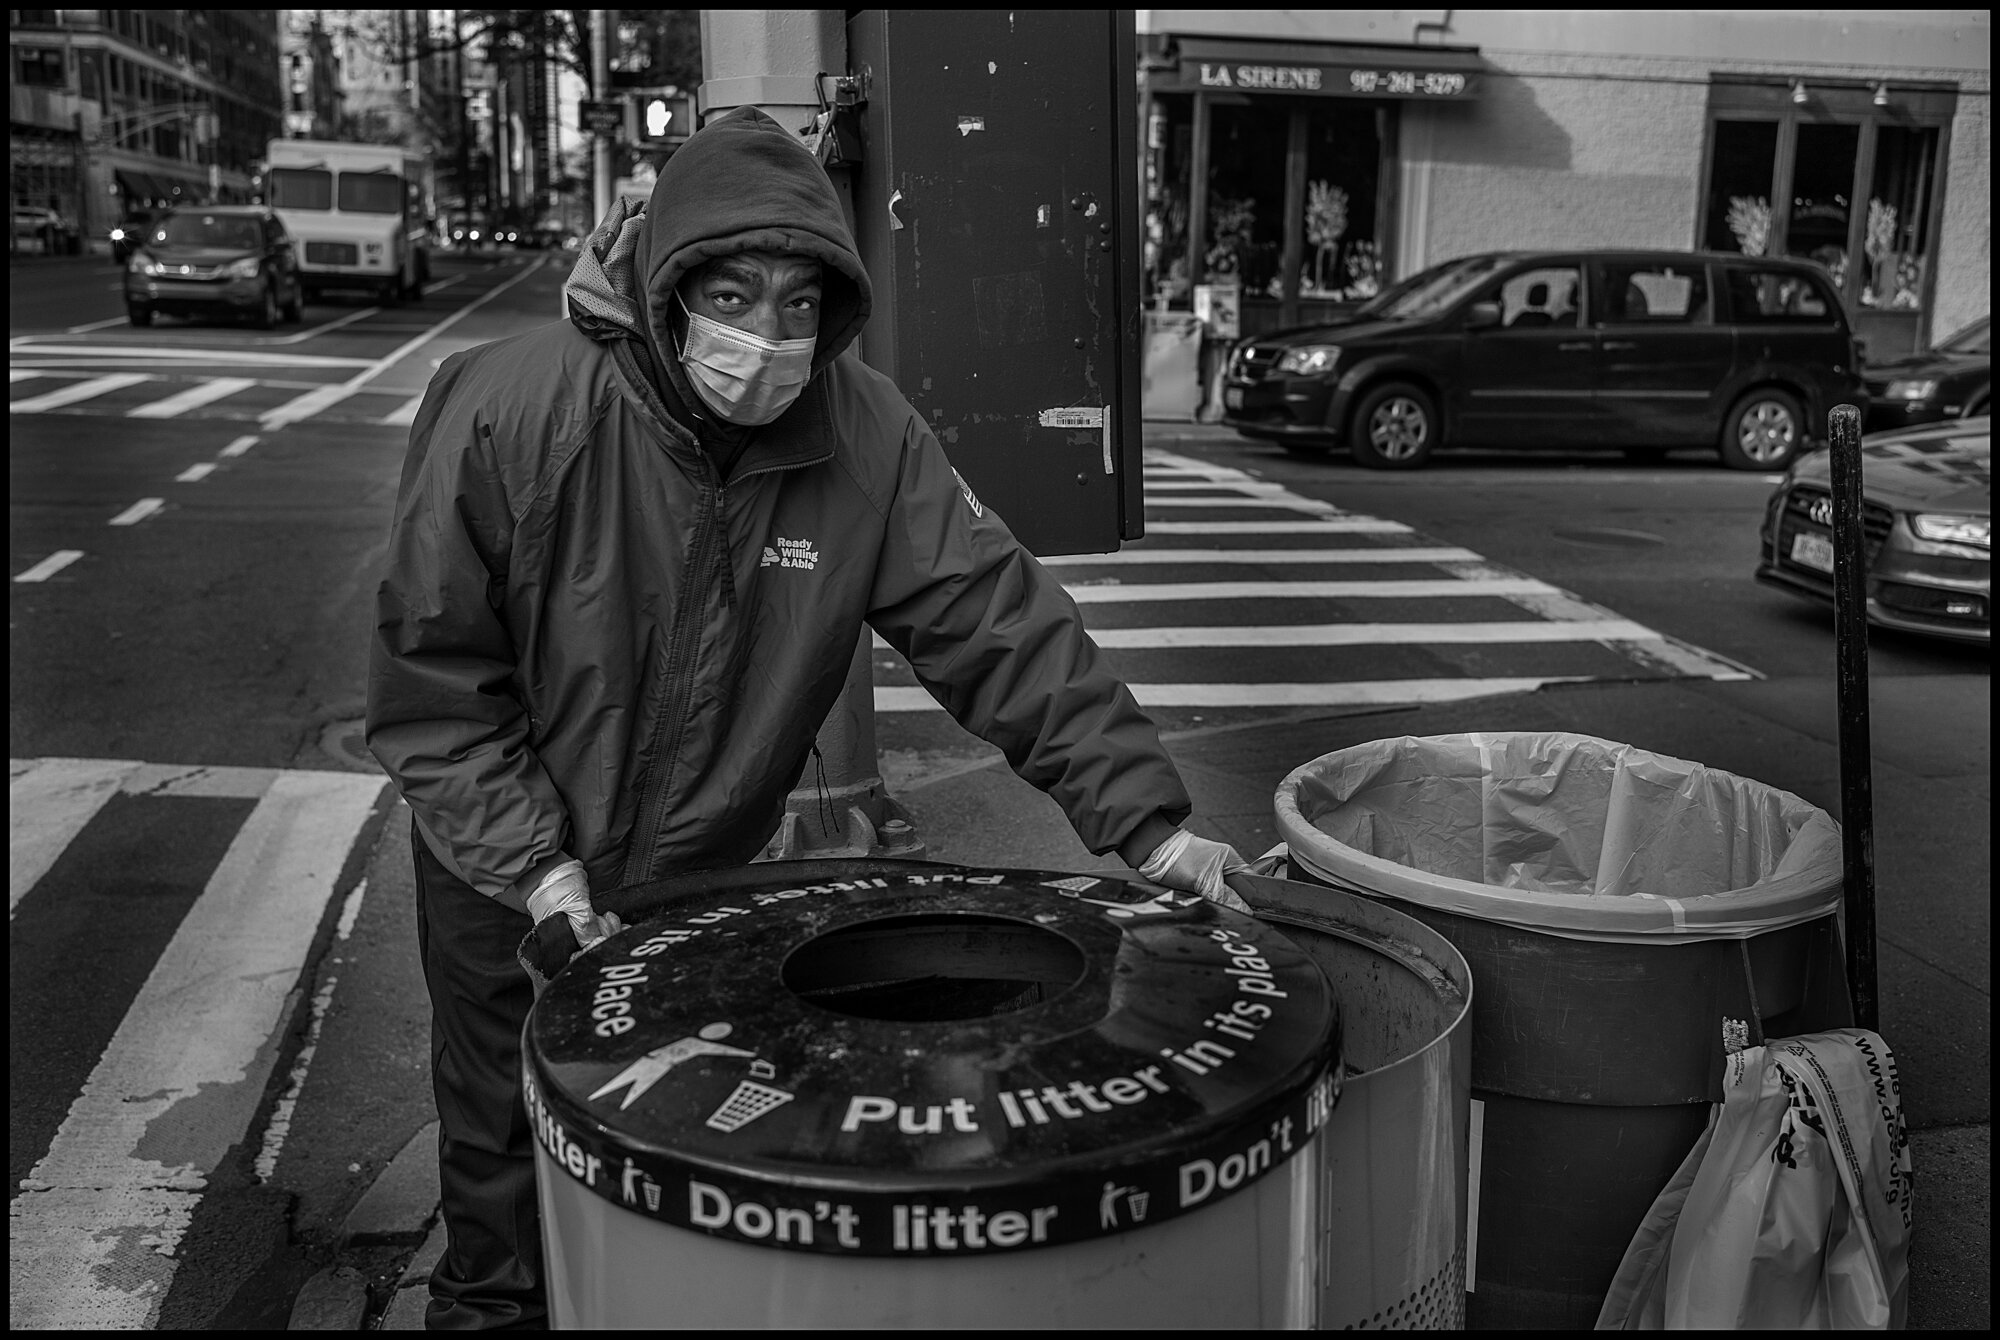  Alex, 52, who works for Go Fund Me.   April 16, 2020. © Peter Turnley  ID# 22-006 